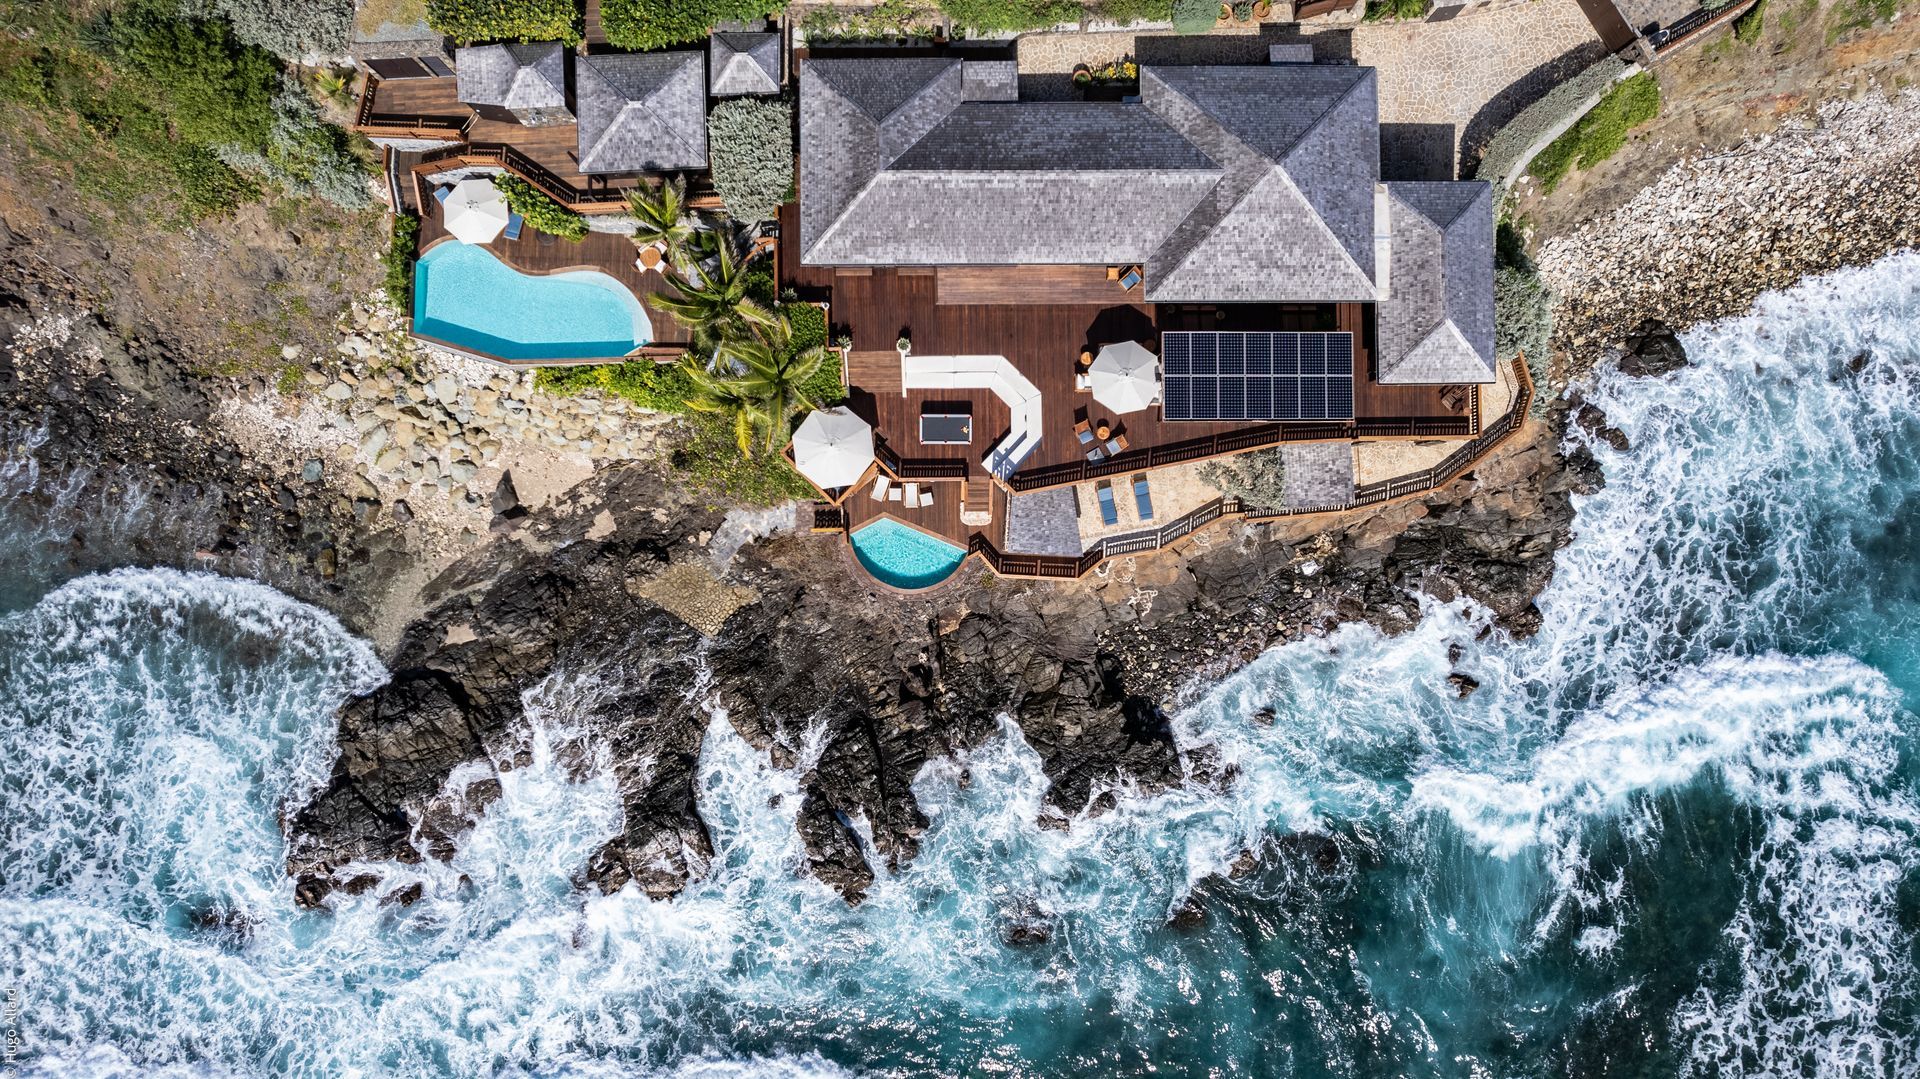 an aerial view of a house on a cliff overlooking the ocean